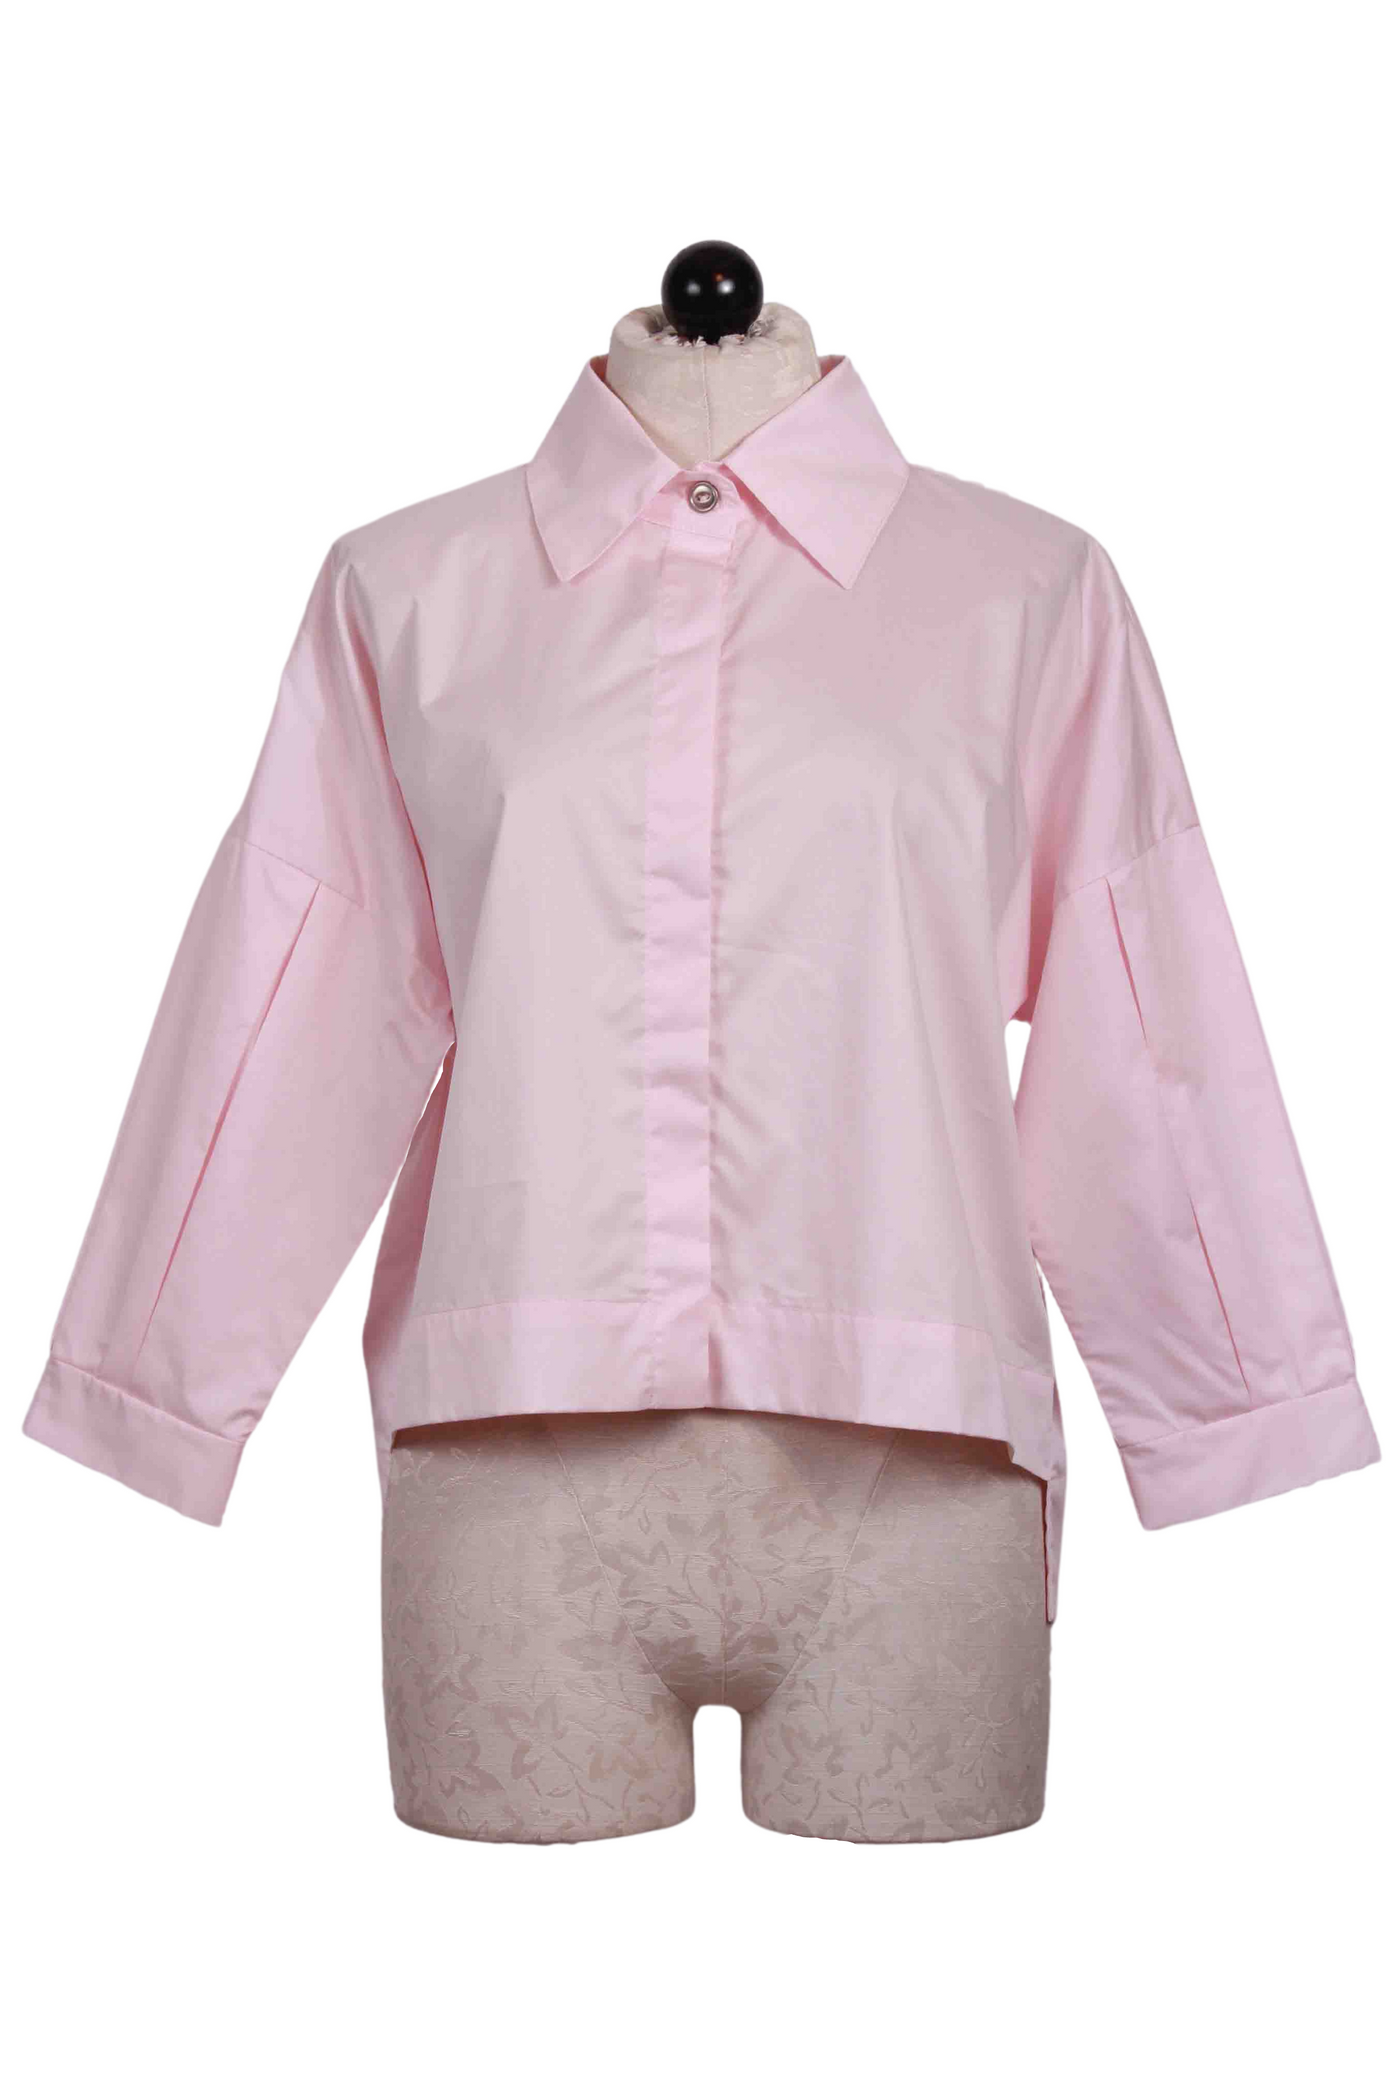 Pinkish Pleat Sleeve Button Up Blouse Shirt by Planet